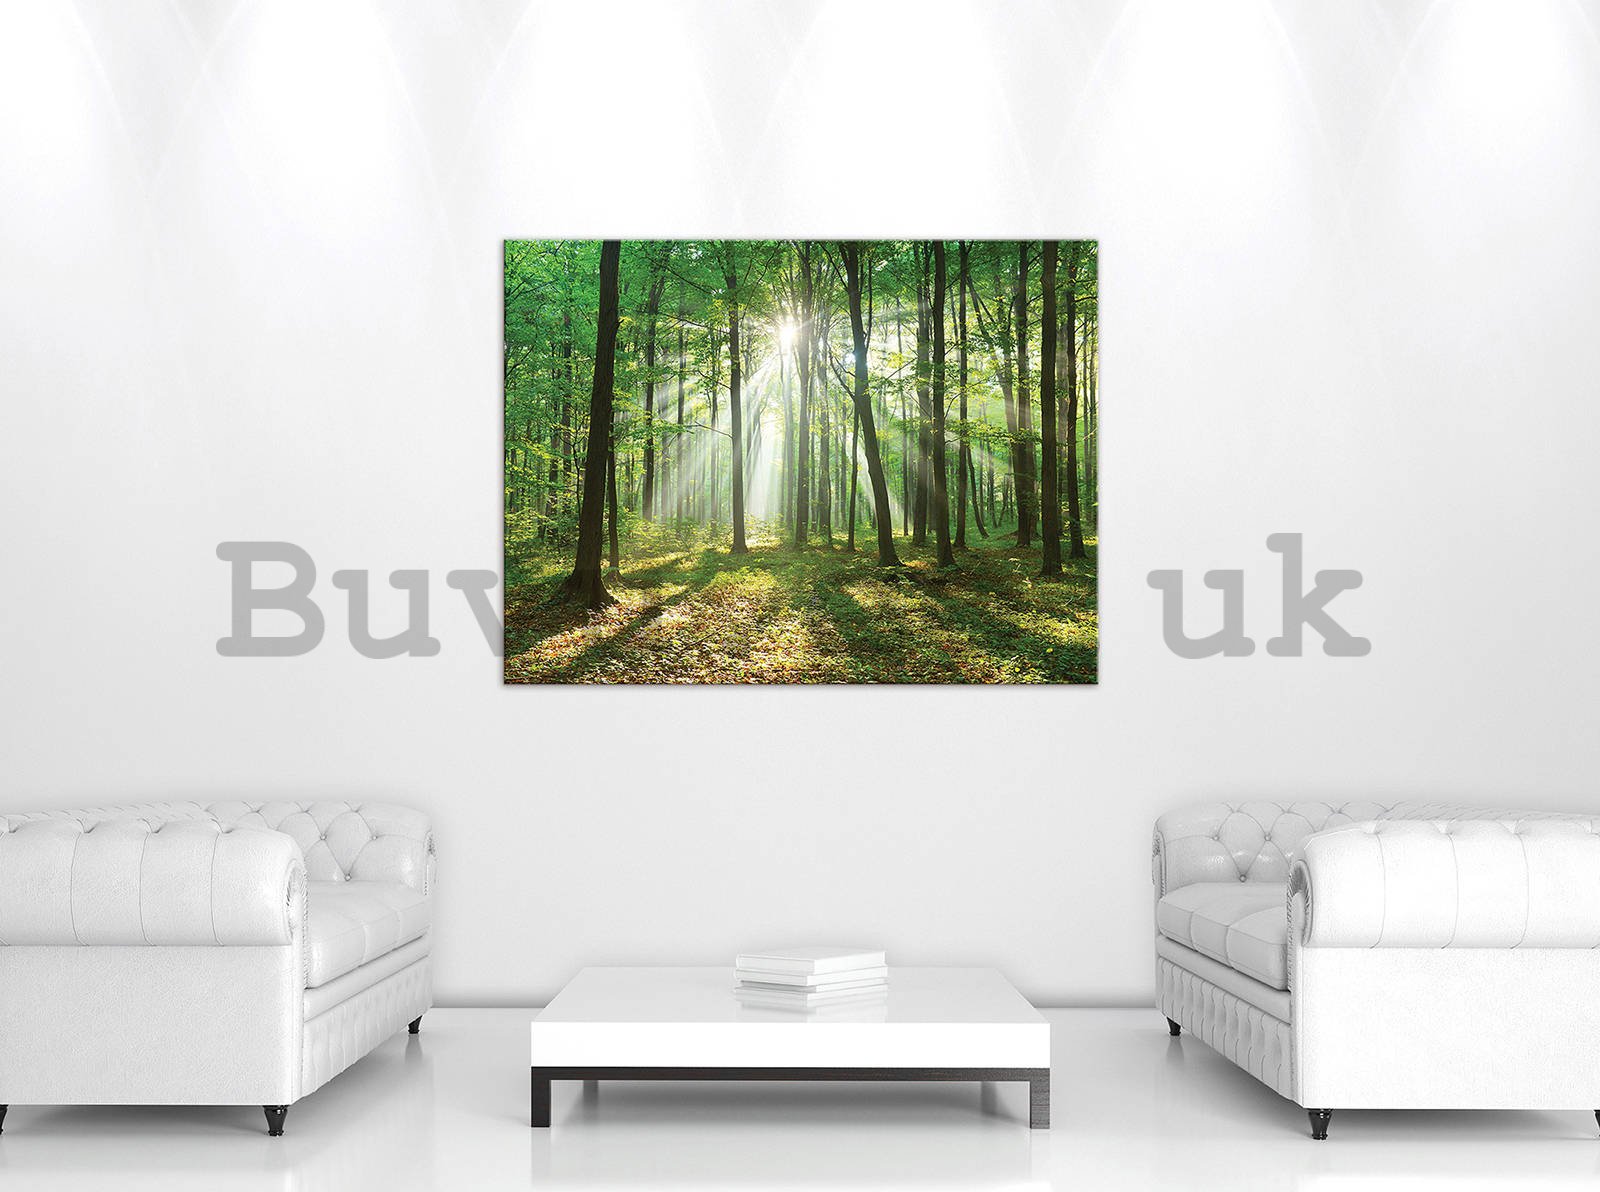 Painting on canvas: Sun in the Forest (3) - 80x60 cm